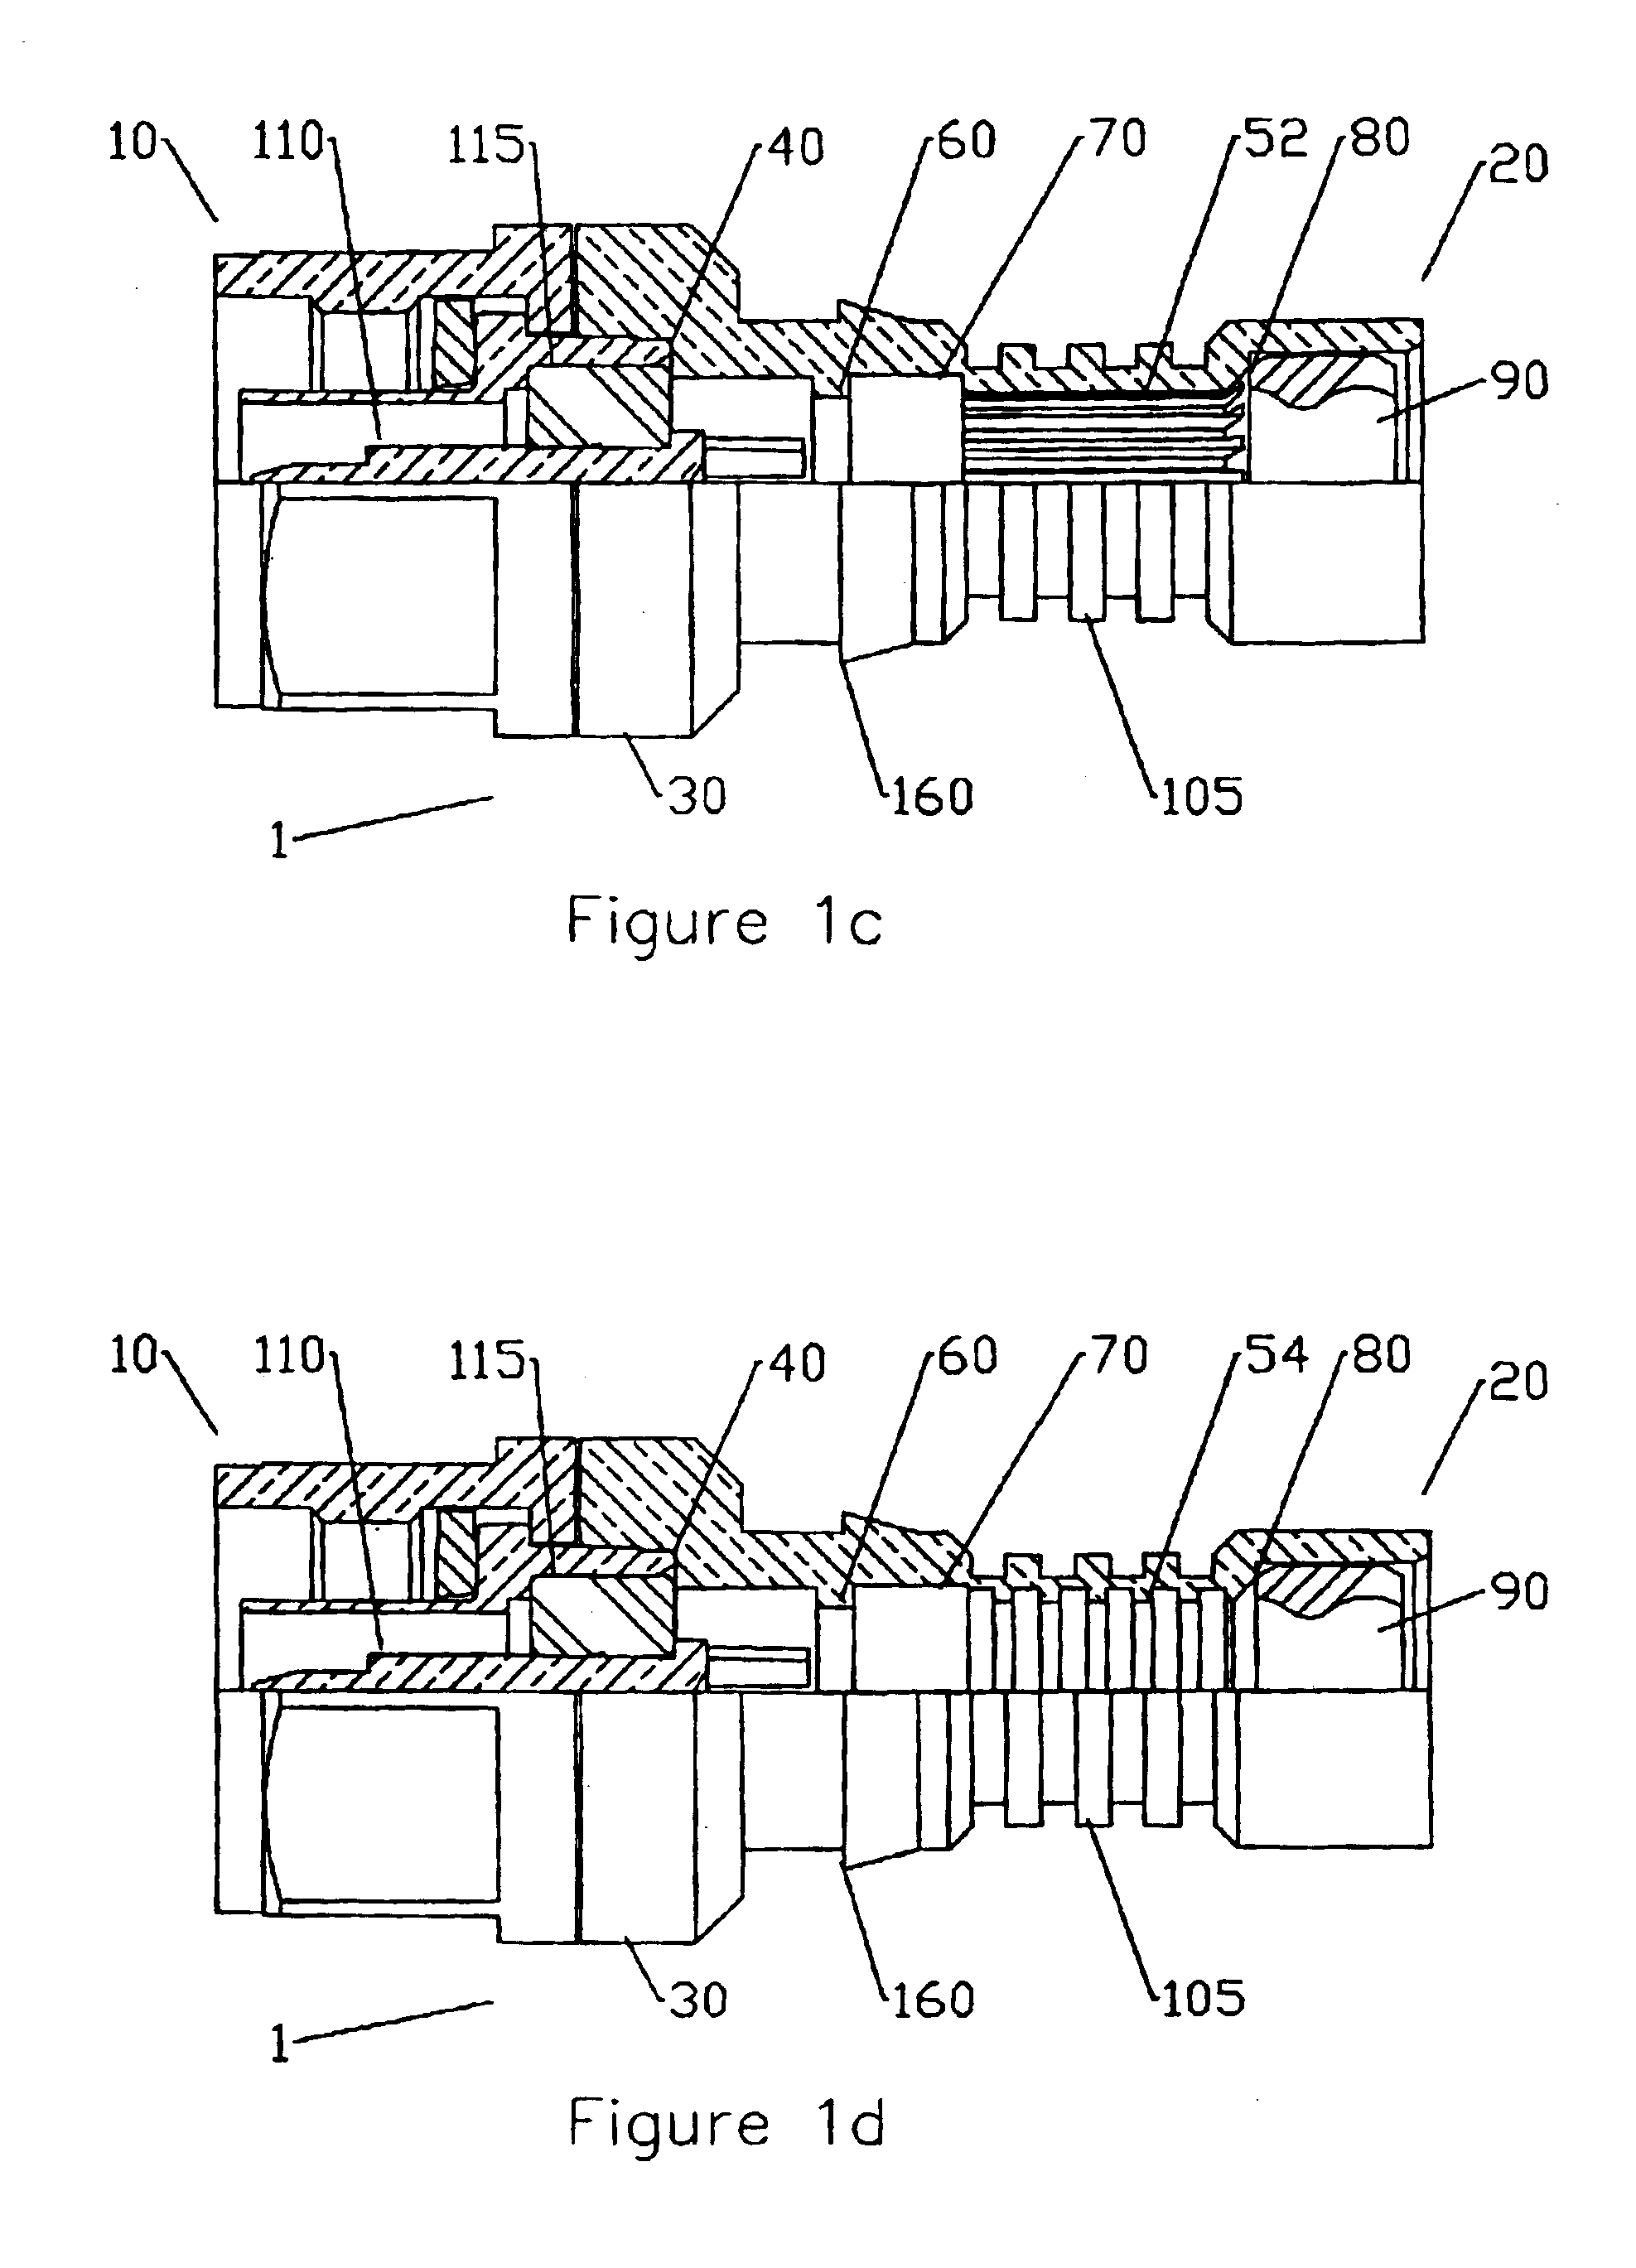 Low cost, high performance cable-connector system and assembly method